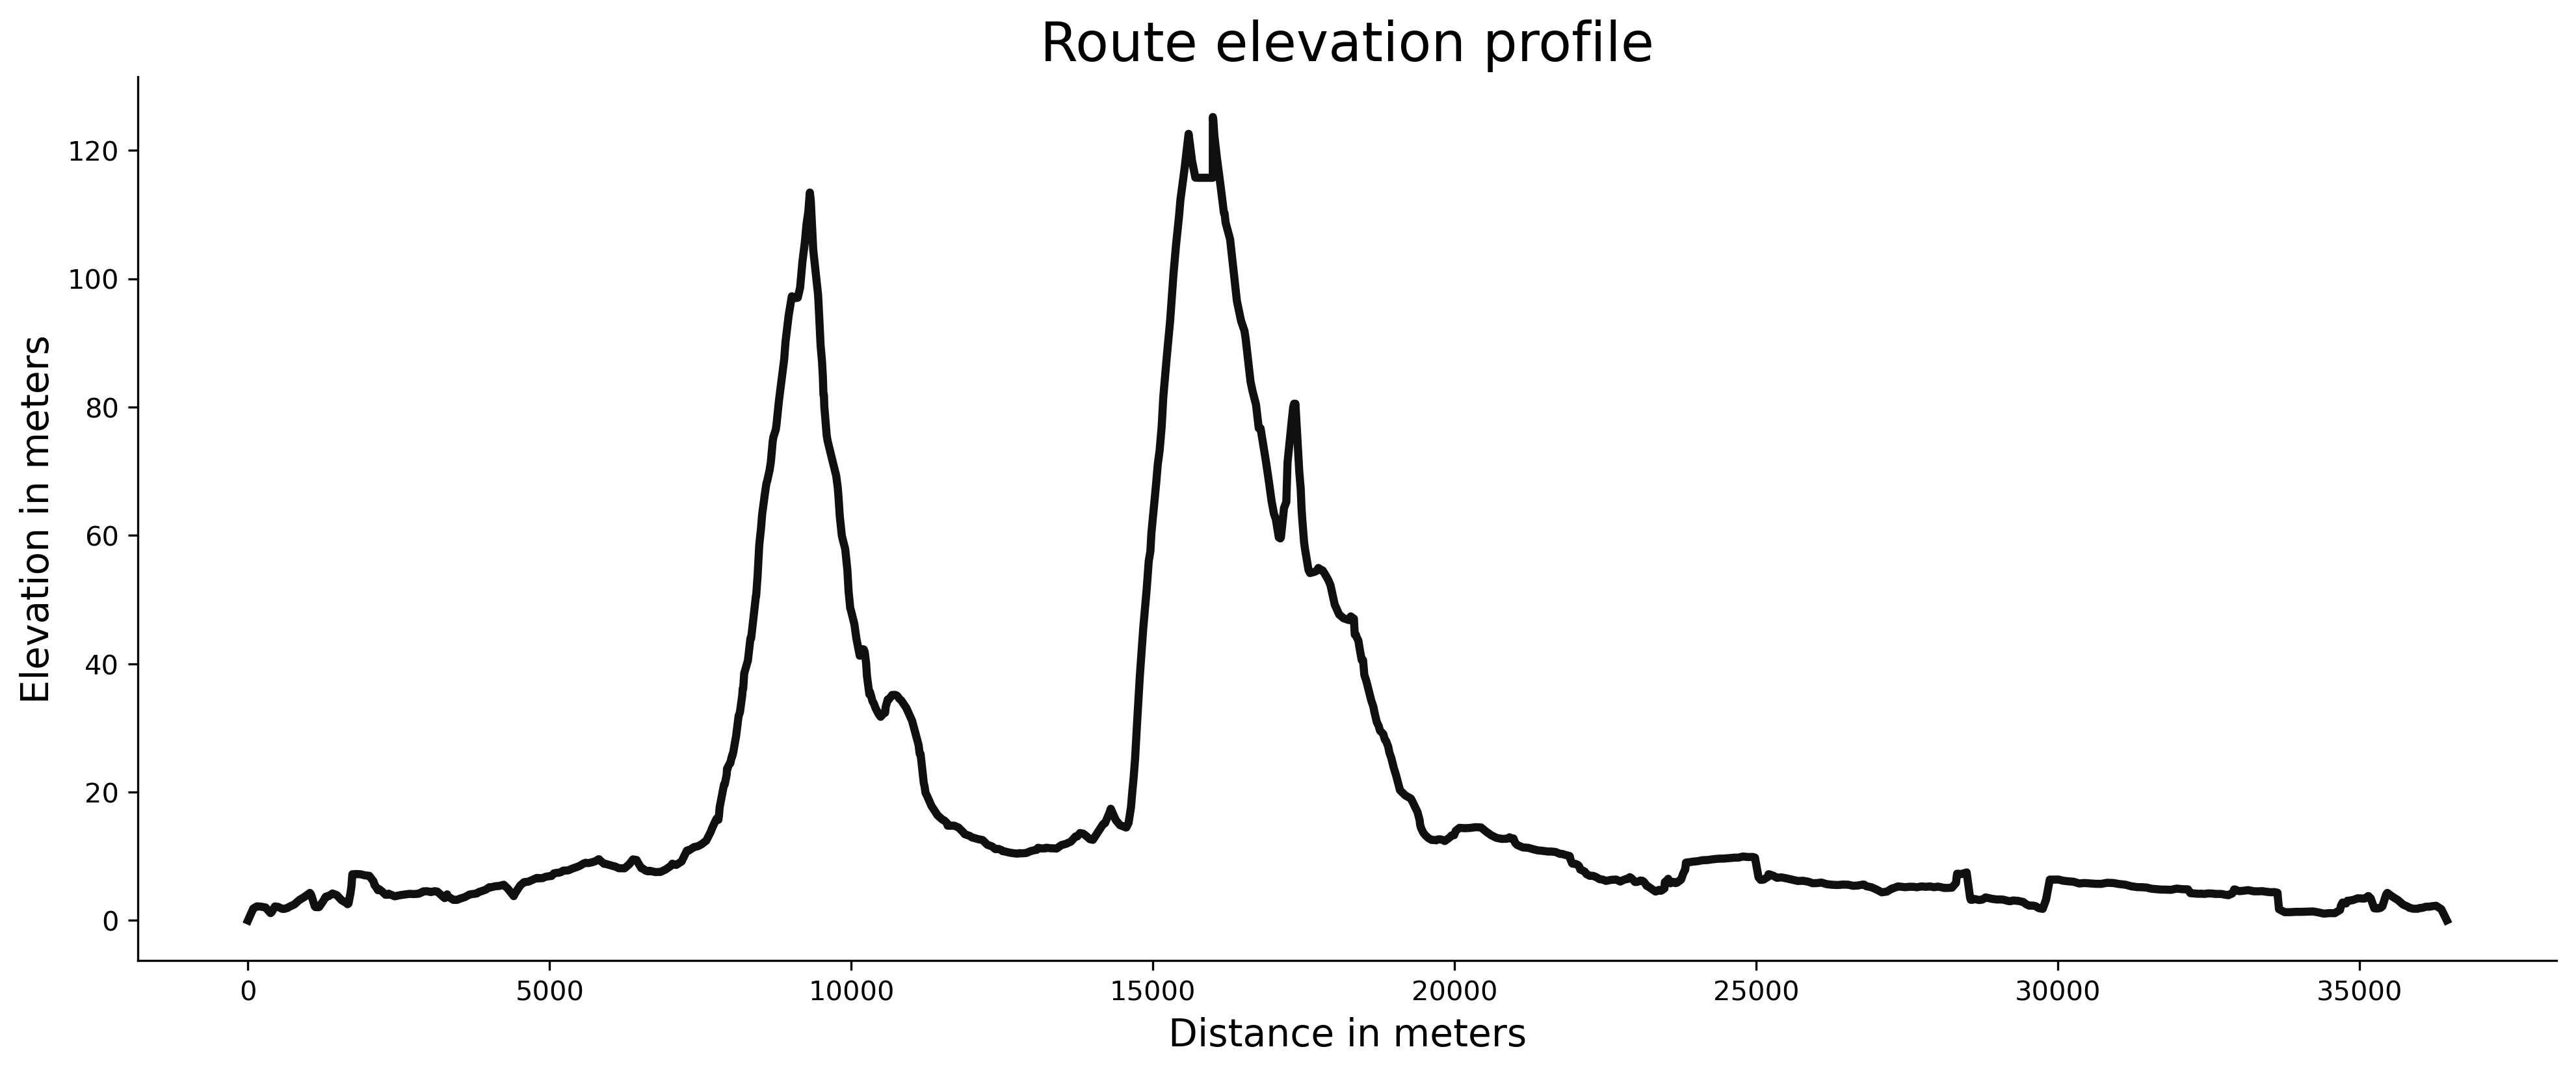 Image 8 - Route elevation profile (image by author)